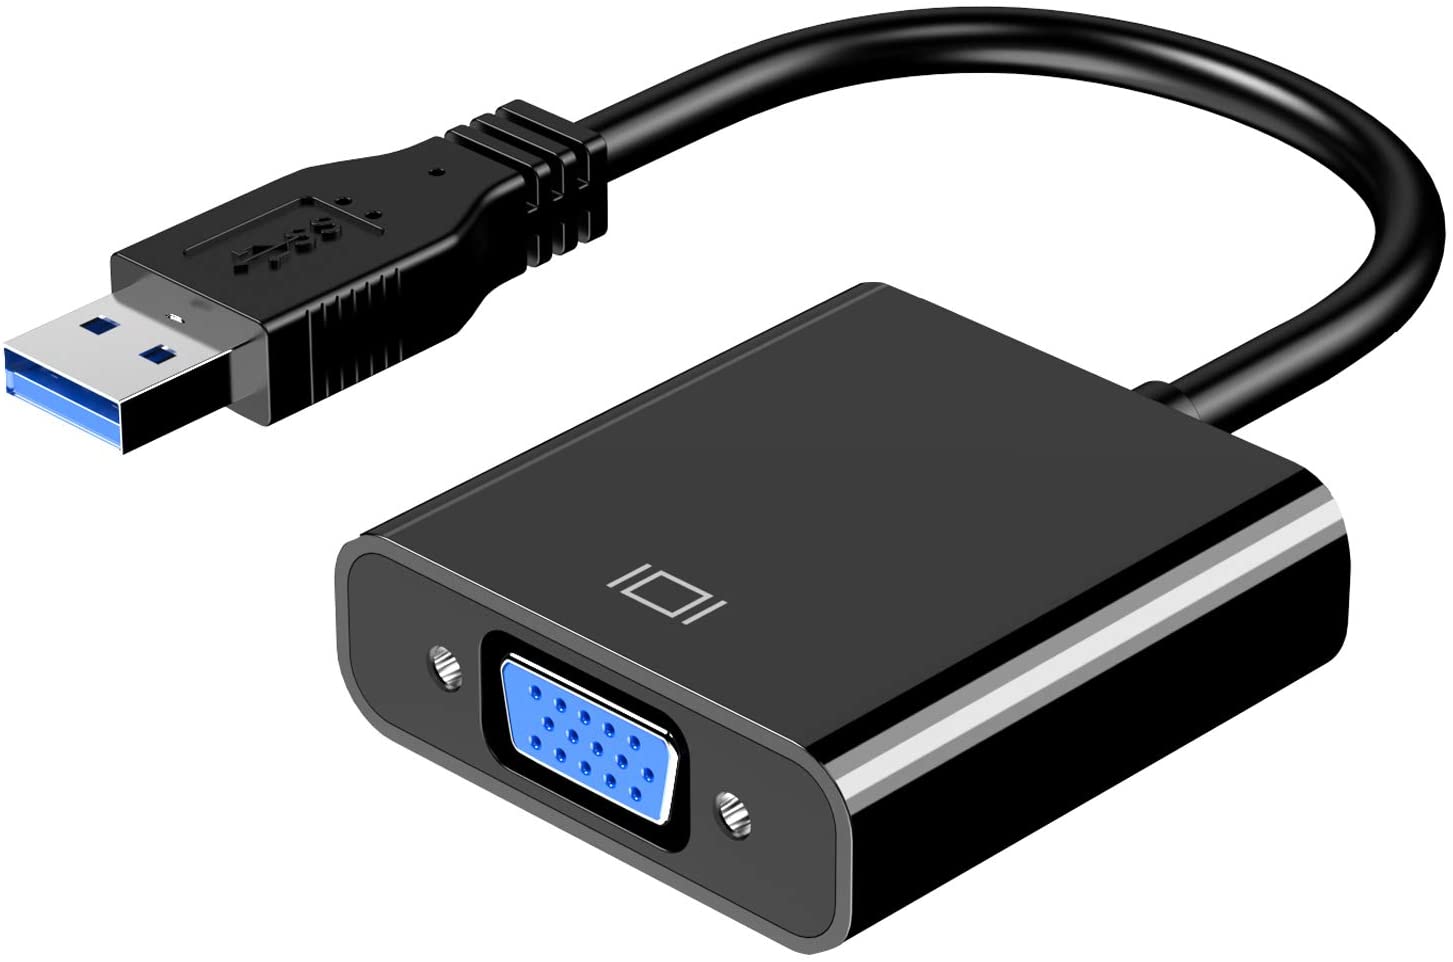 ce fc usb to vga adapter driver